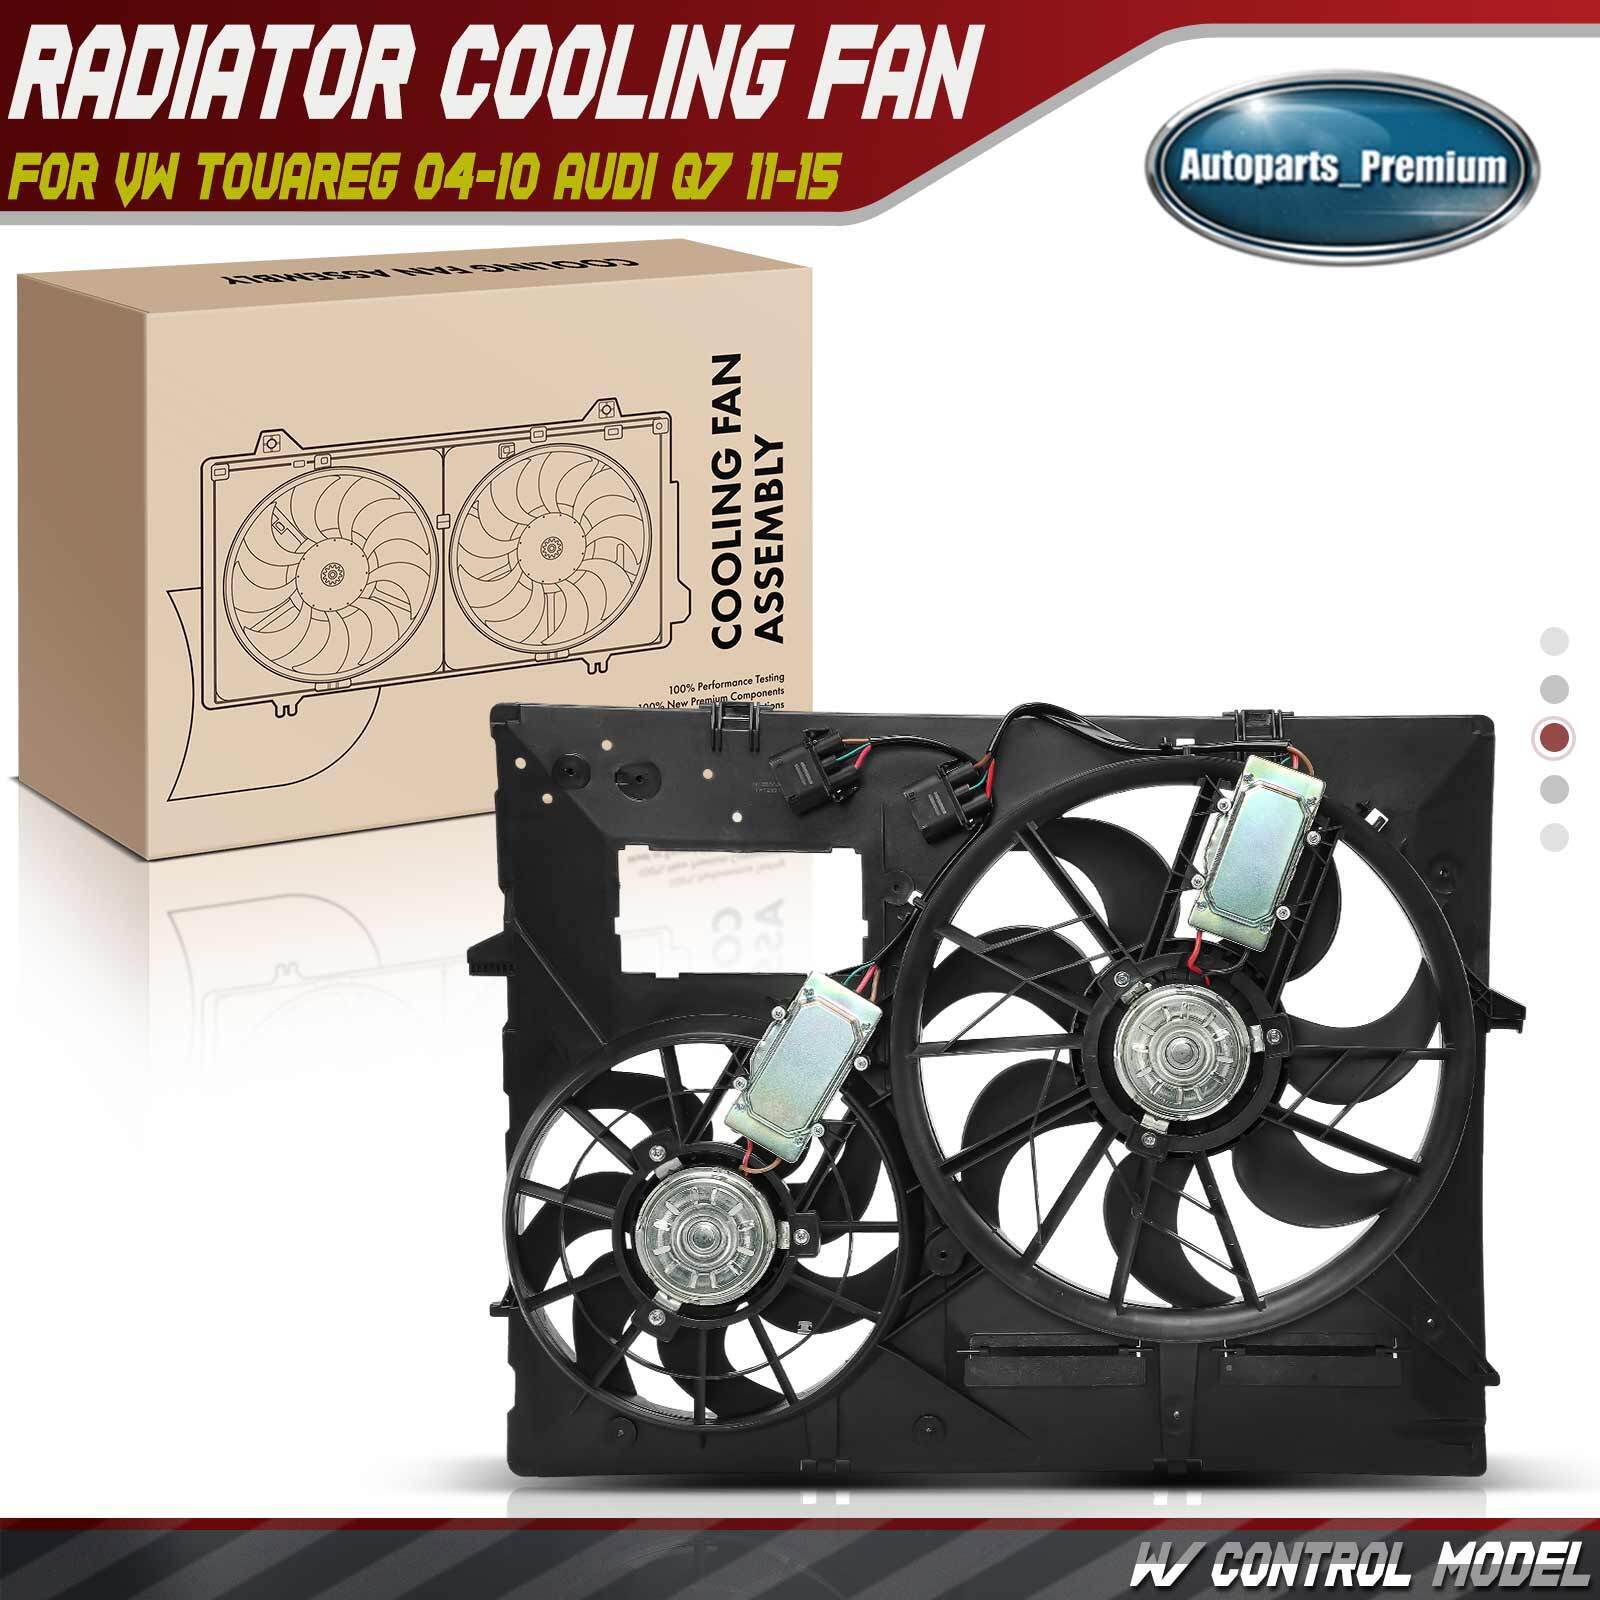 Dual Engine Radiator Cooling Fan w/ Control Model Assembly for VW Touareg 04-10